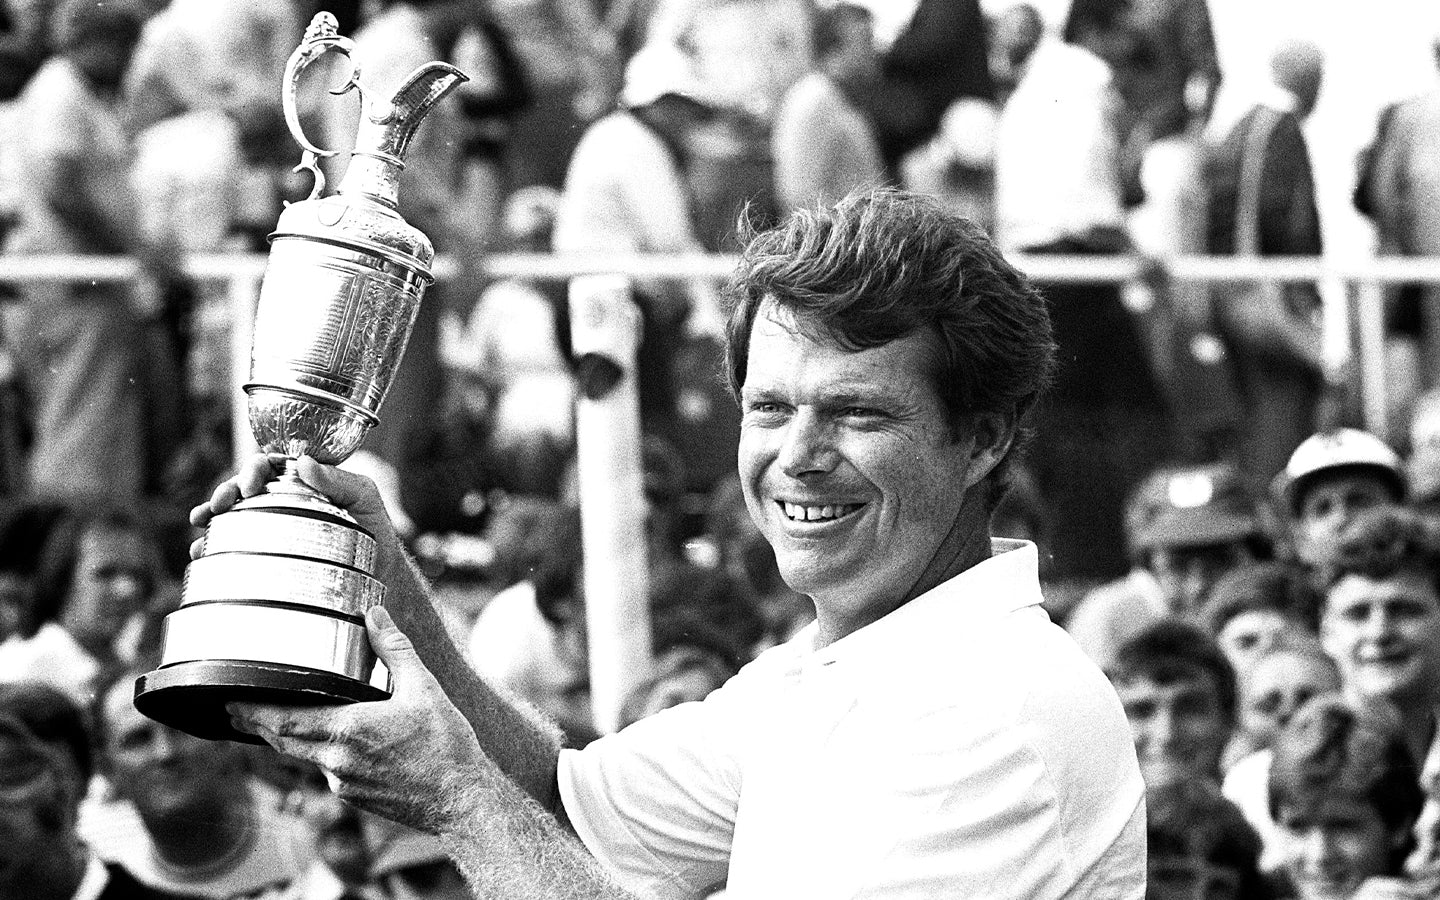 Tom Watson Holds Up His Trophy After Winning The Open, Golf's Oldest Major Tournament